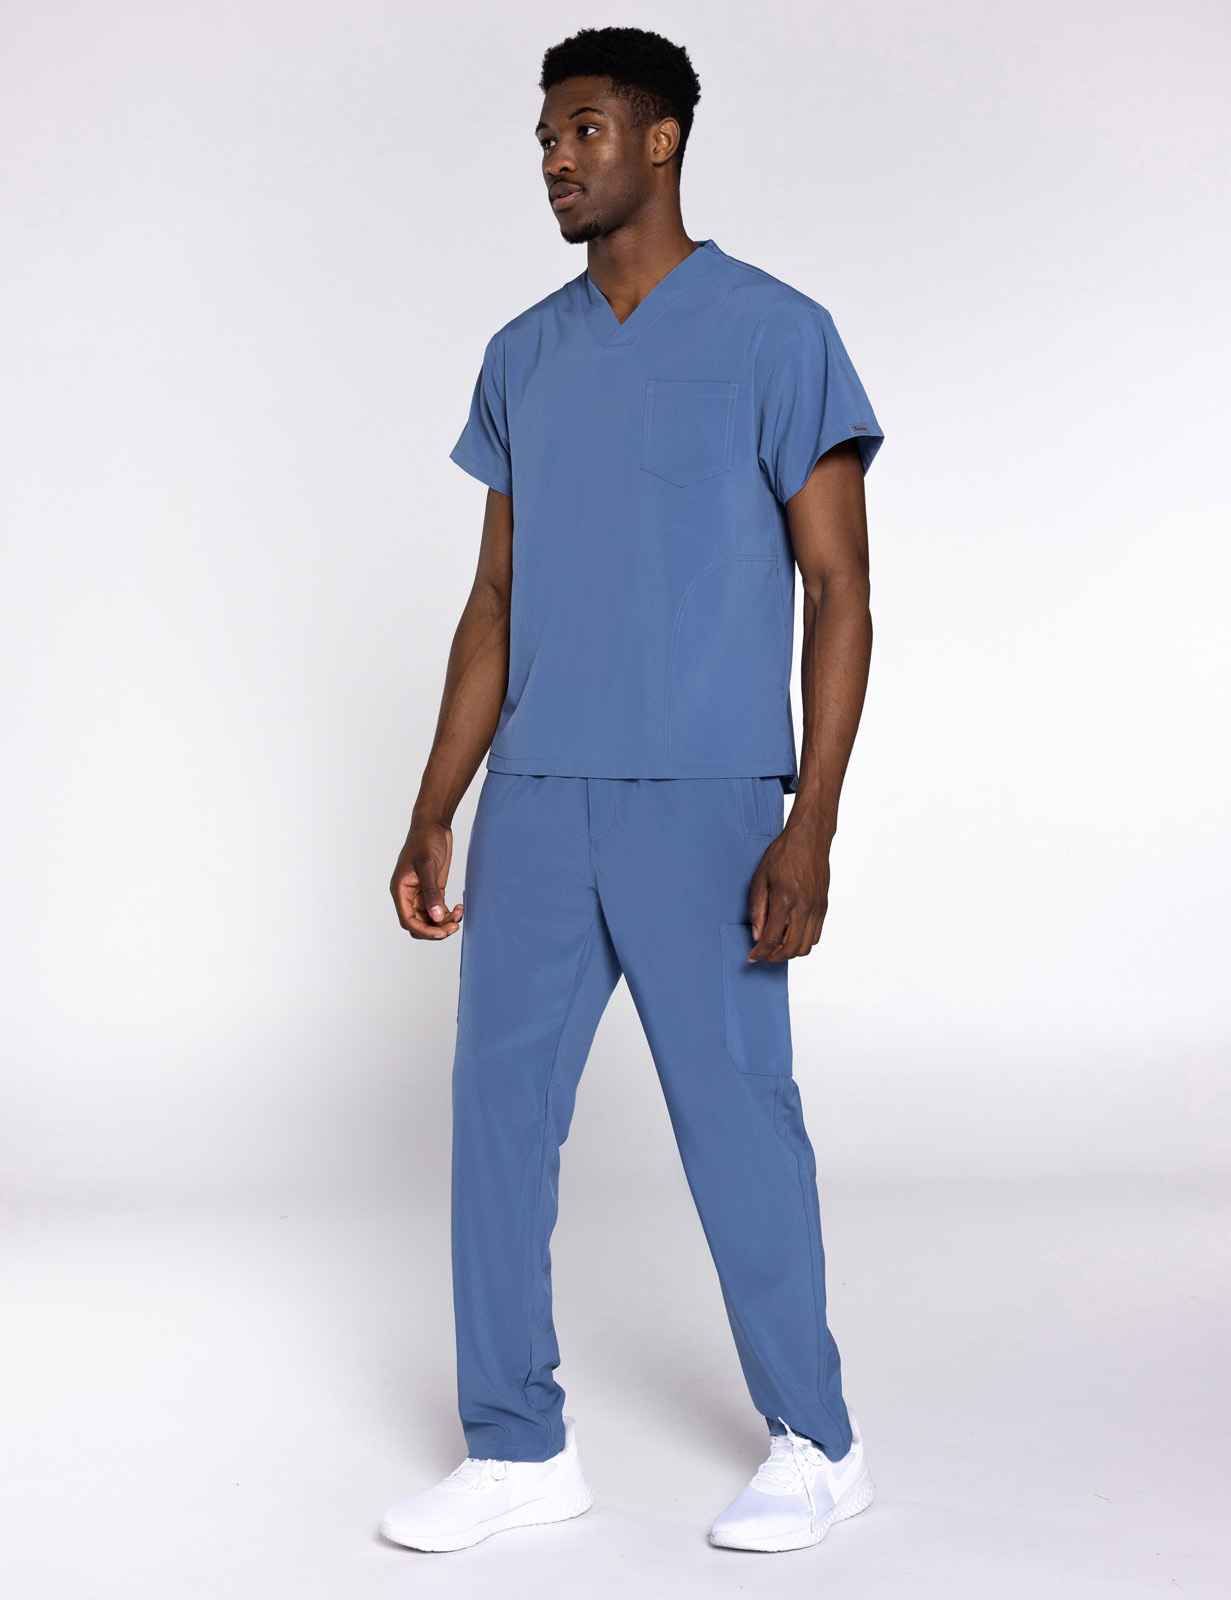 Anon Men's Scrub Top (Stealth Collection) Poly/Spandex - Steel Blue